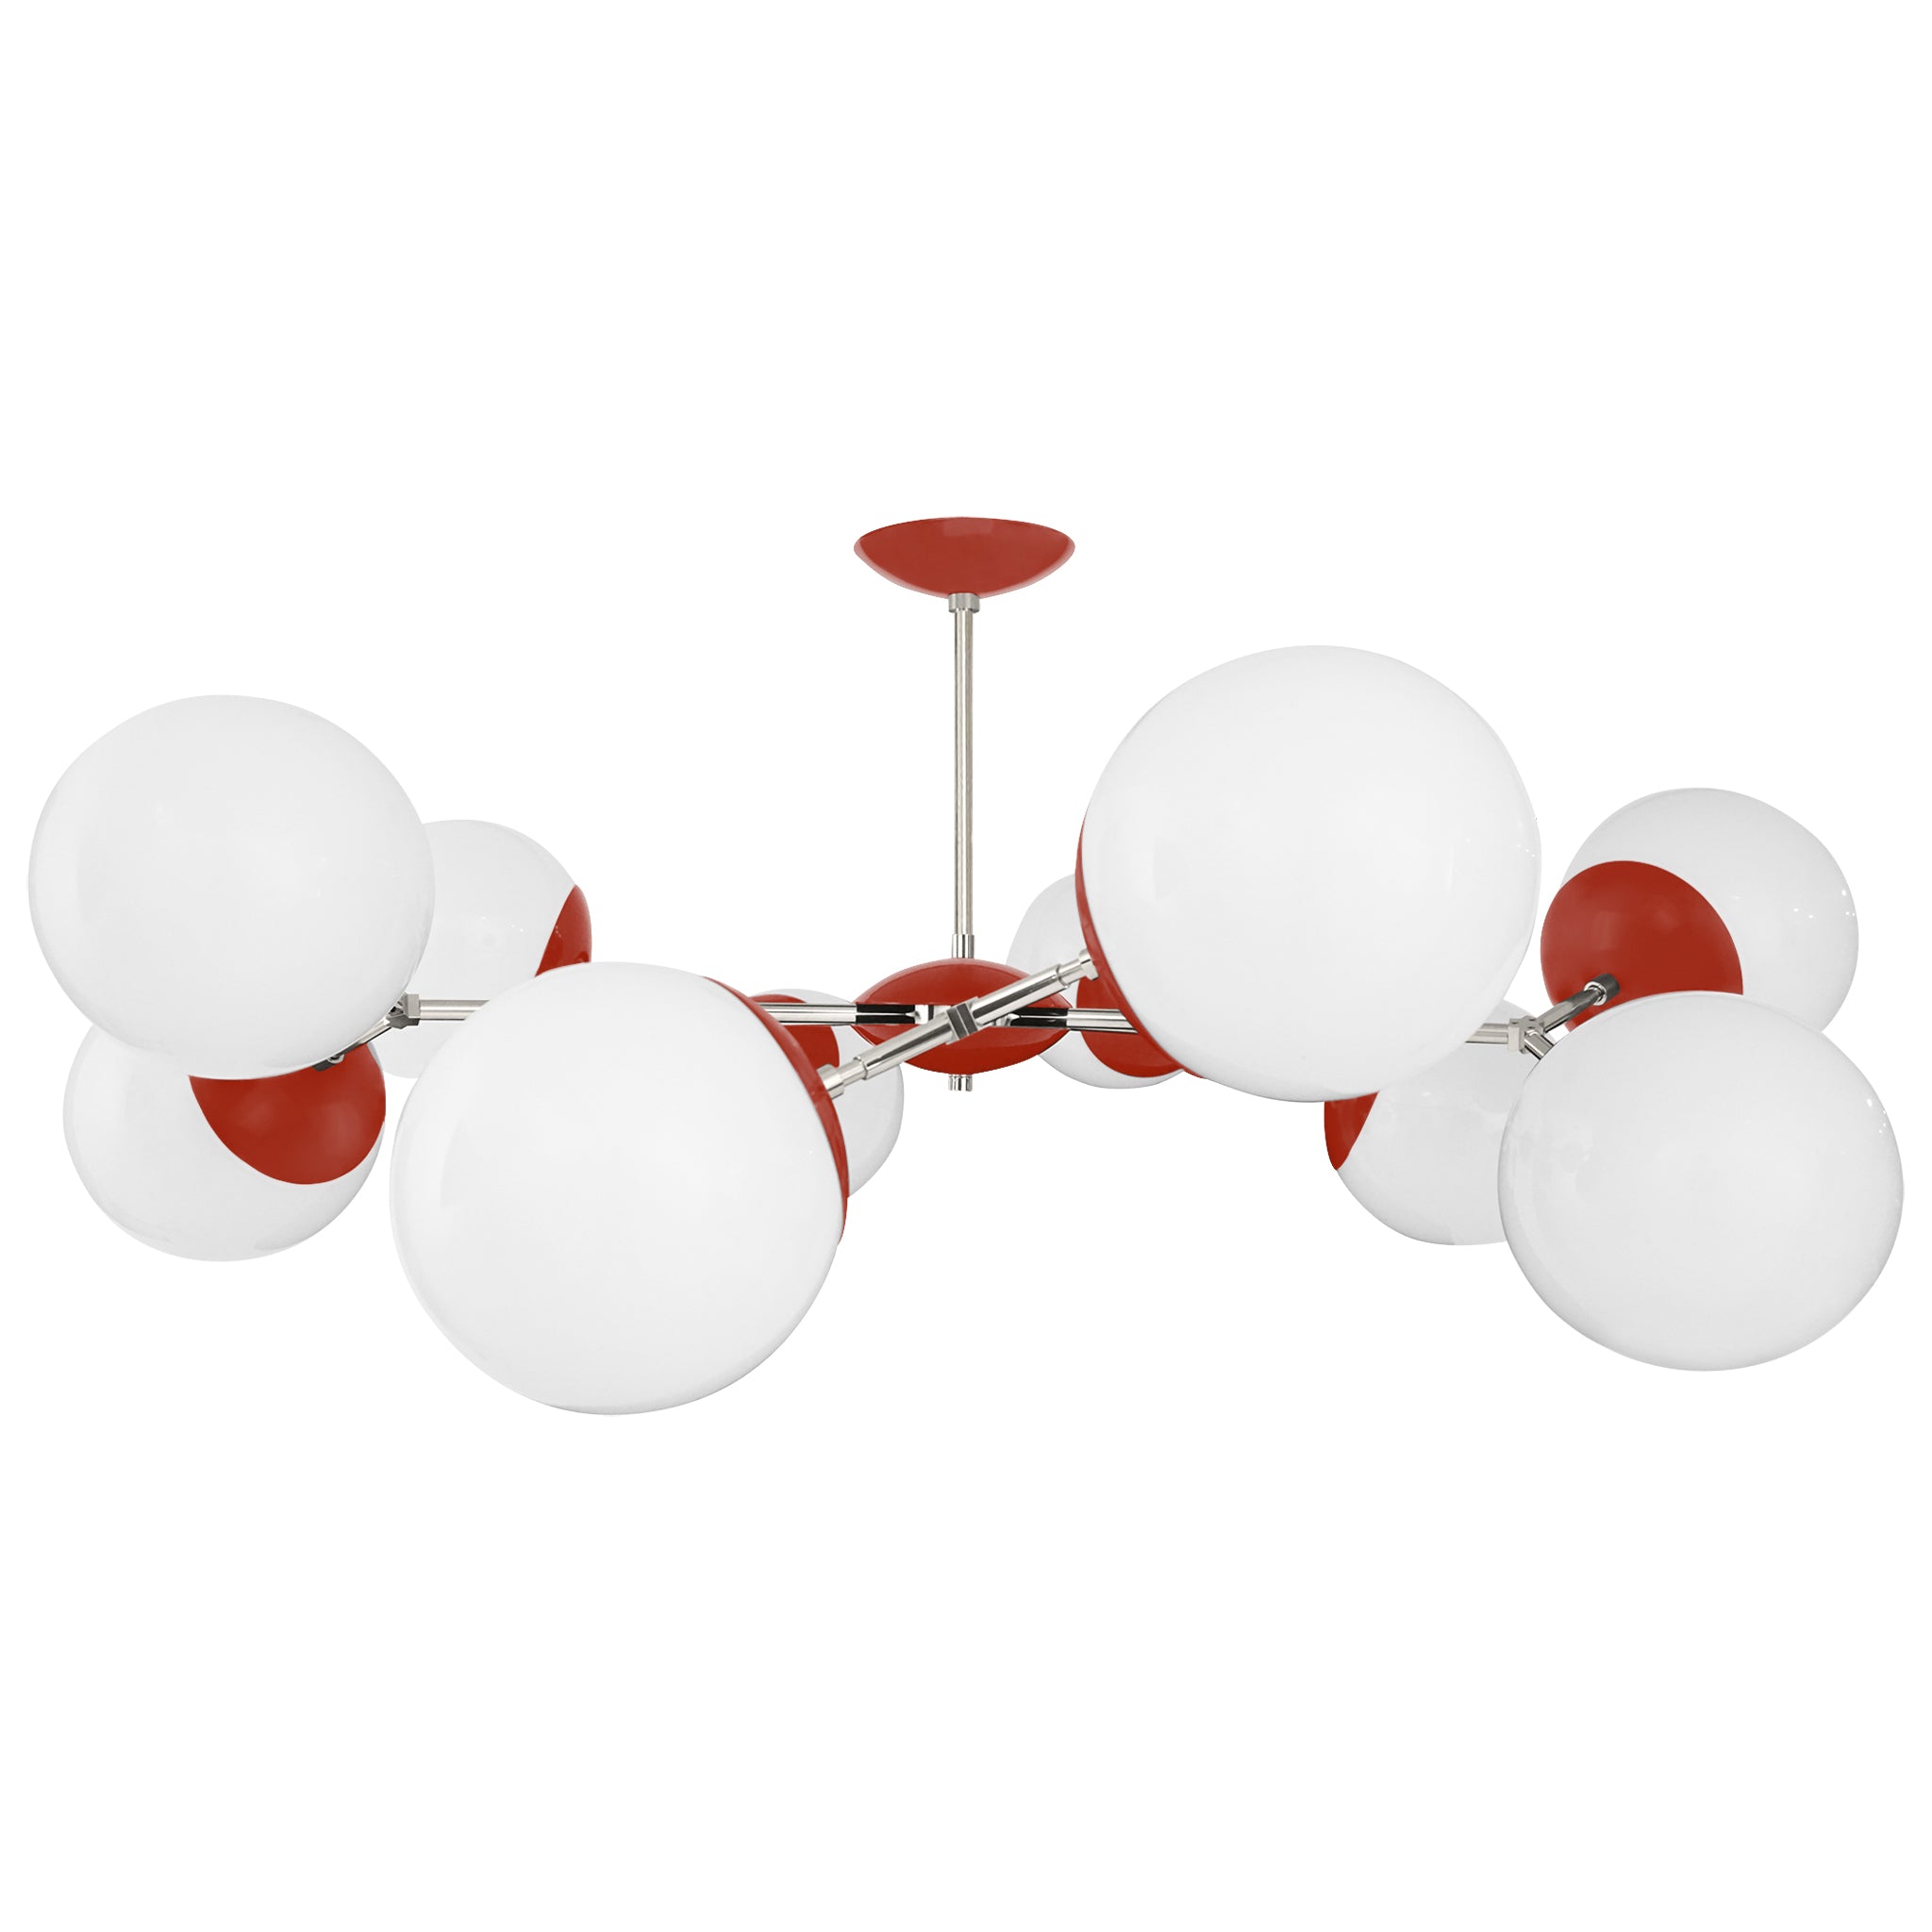 Nickel and riding hood red color Crown flush mount 46" Dutton Brown lighting